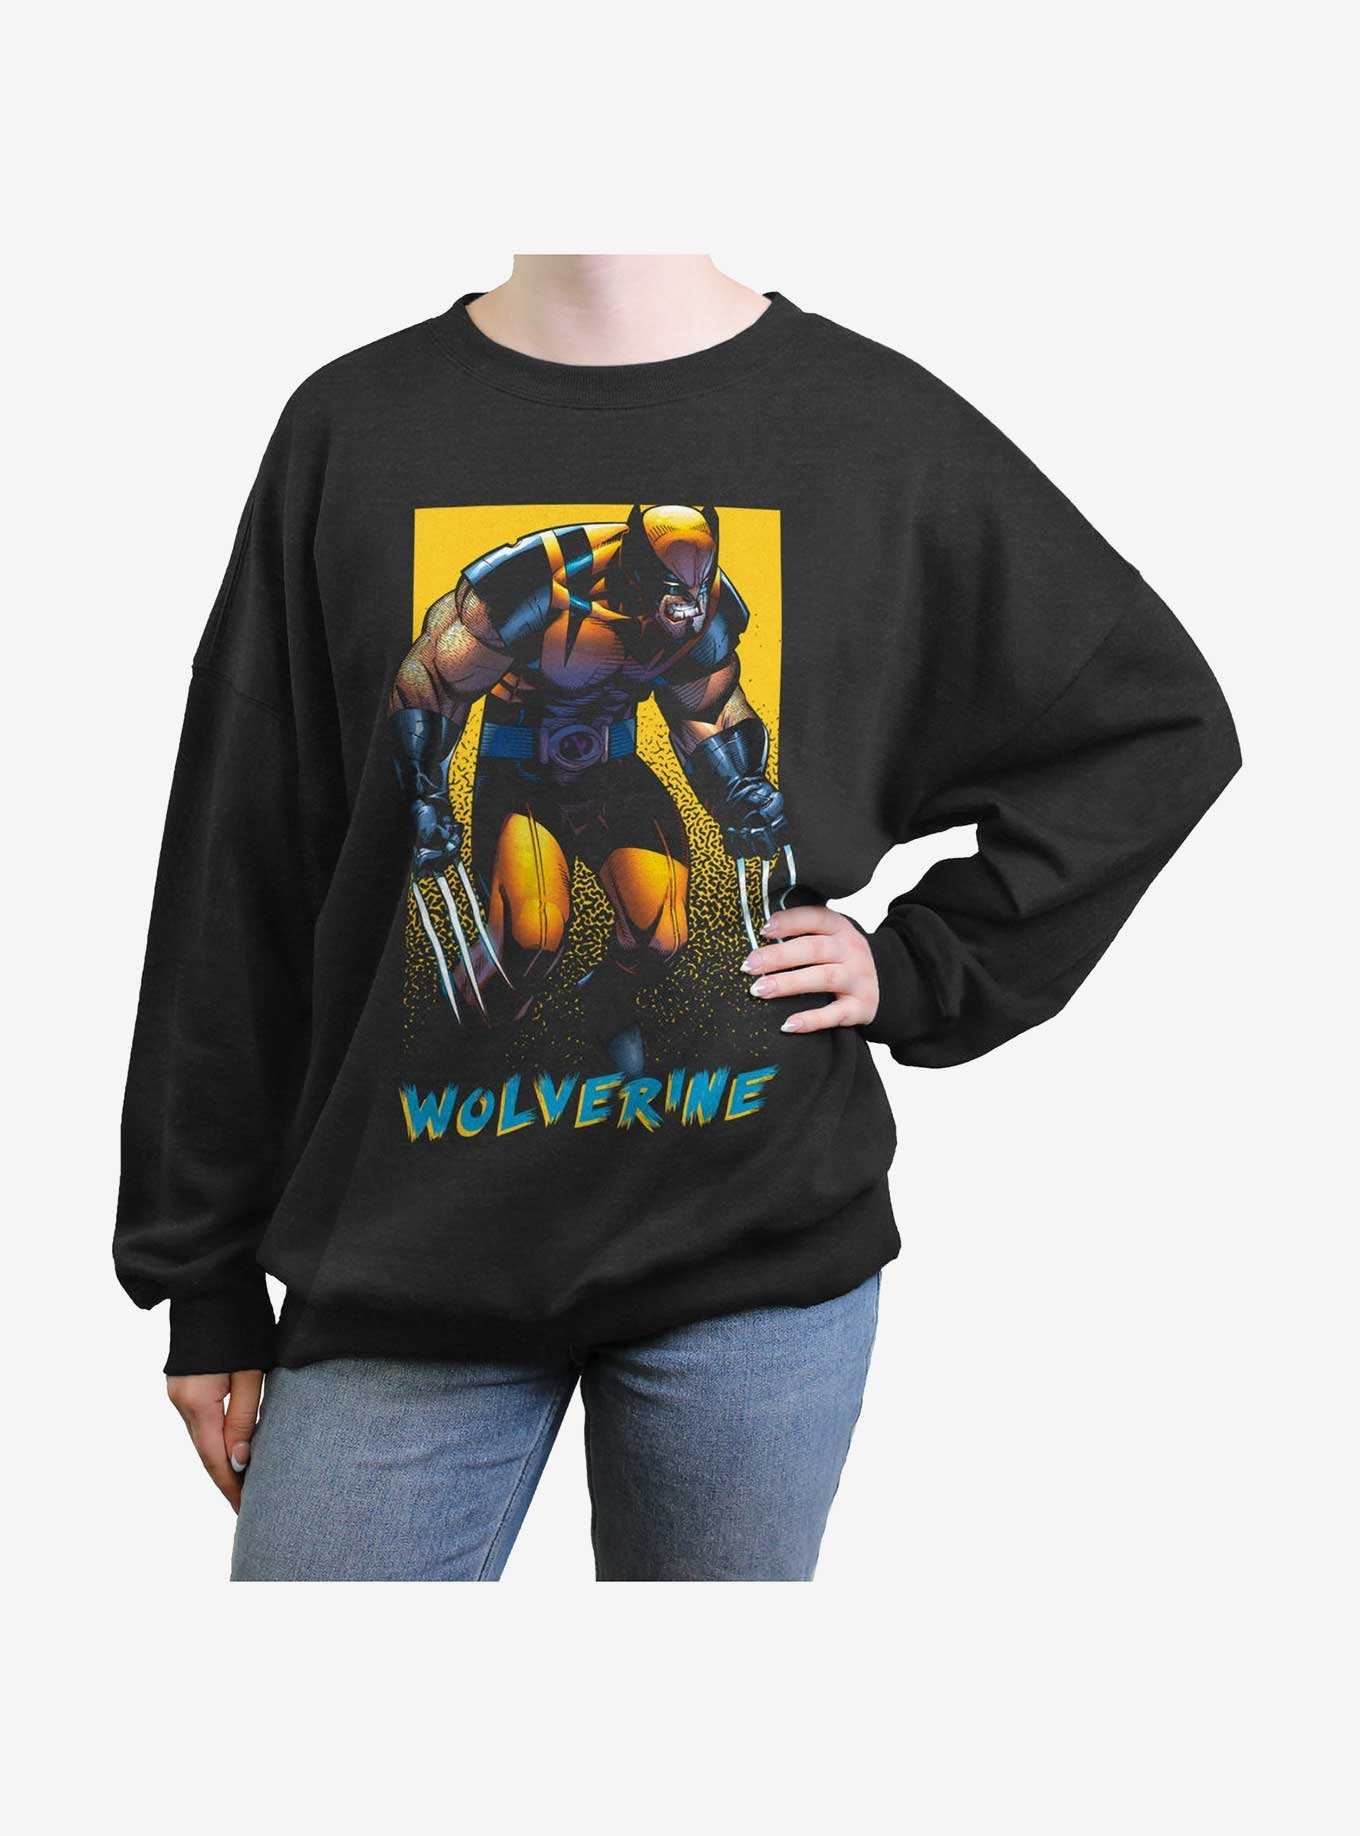 Wolverine Claws Out Poster Girls Oversized Sweatshirt, , hi-res